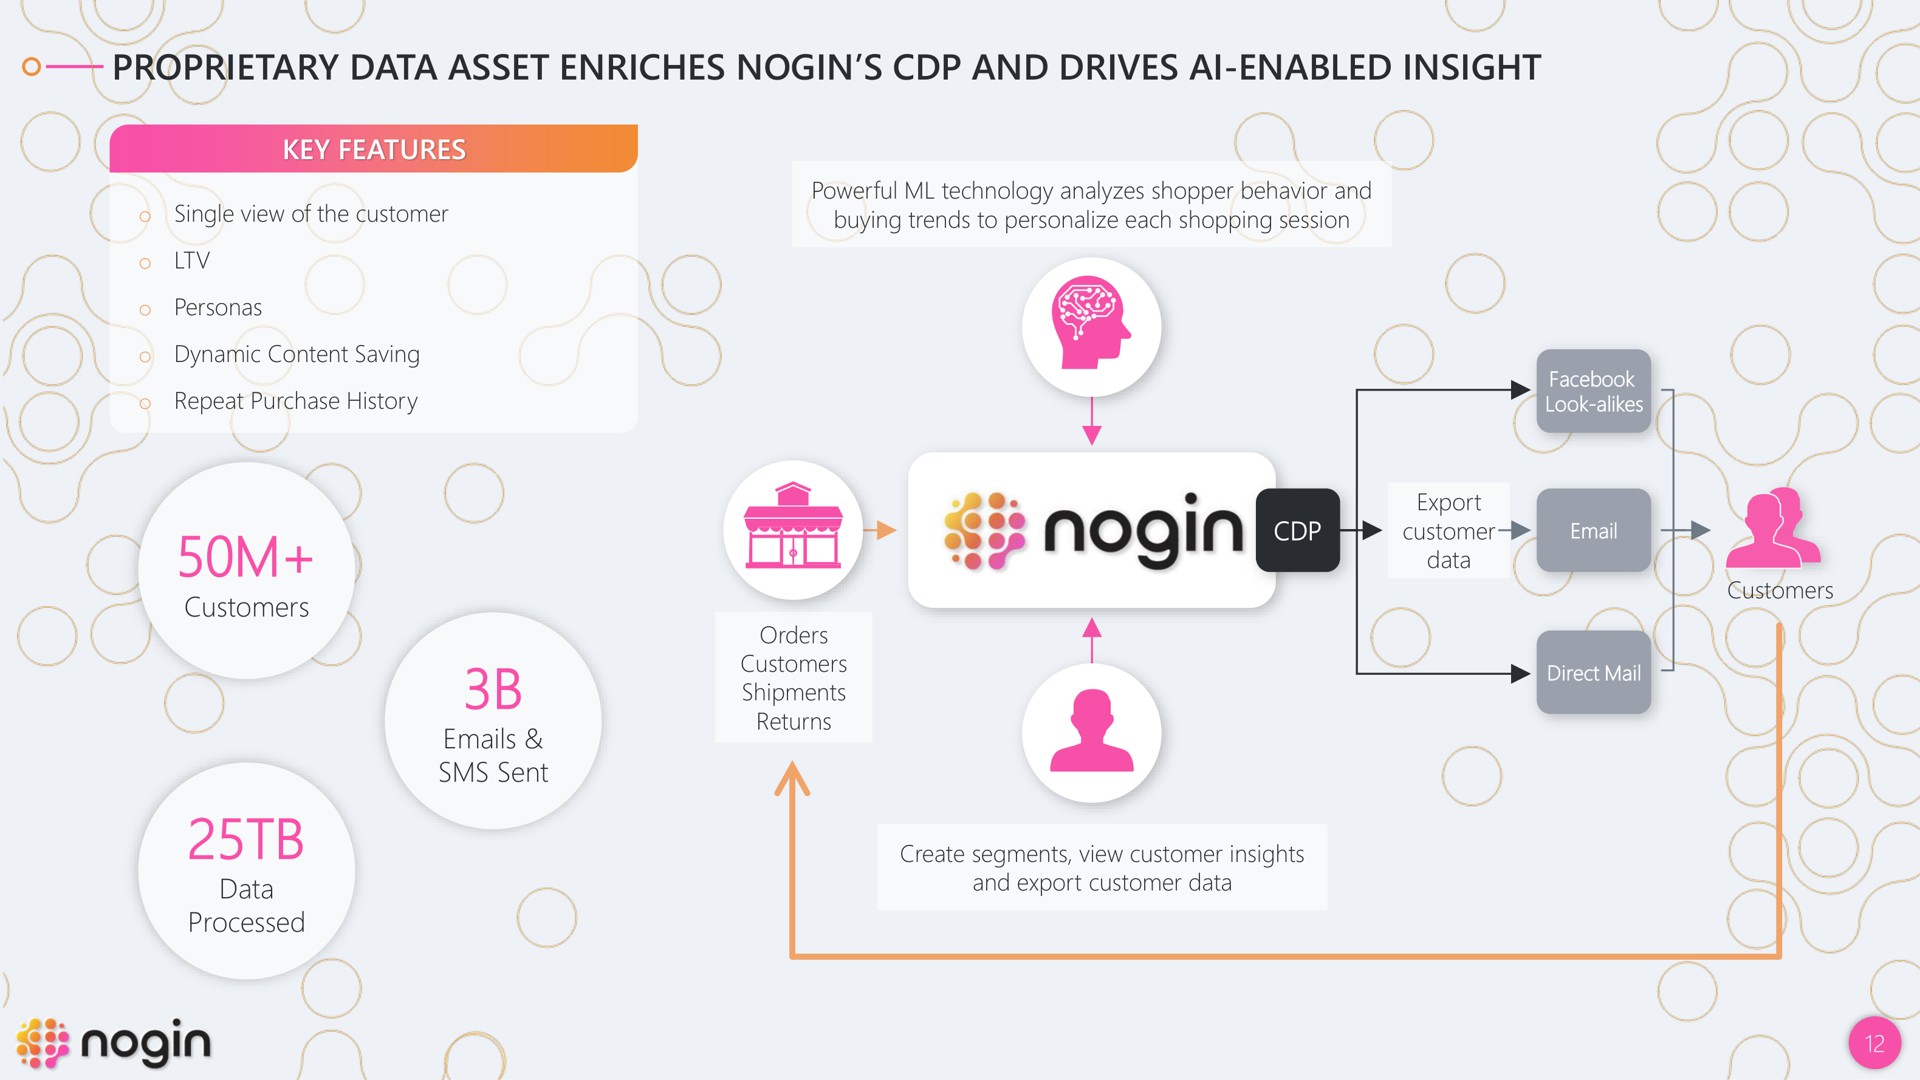 proprietary data asset enriches and drives enabled insight key features customers data processed sent eve | Nogin